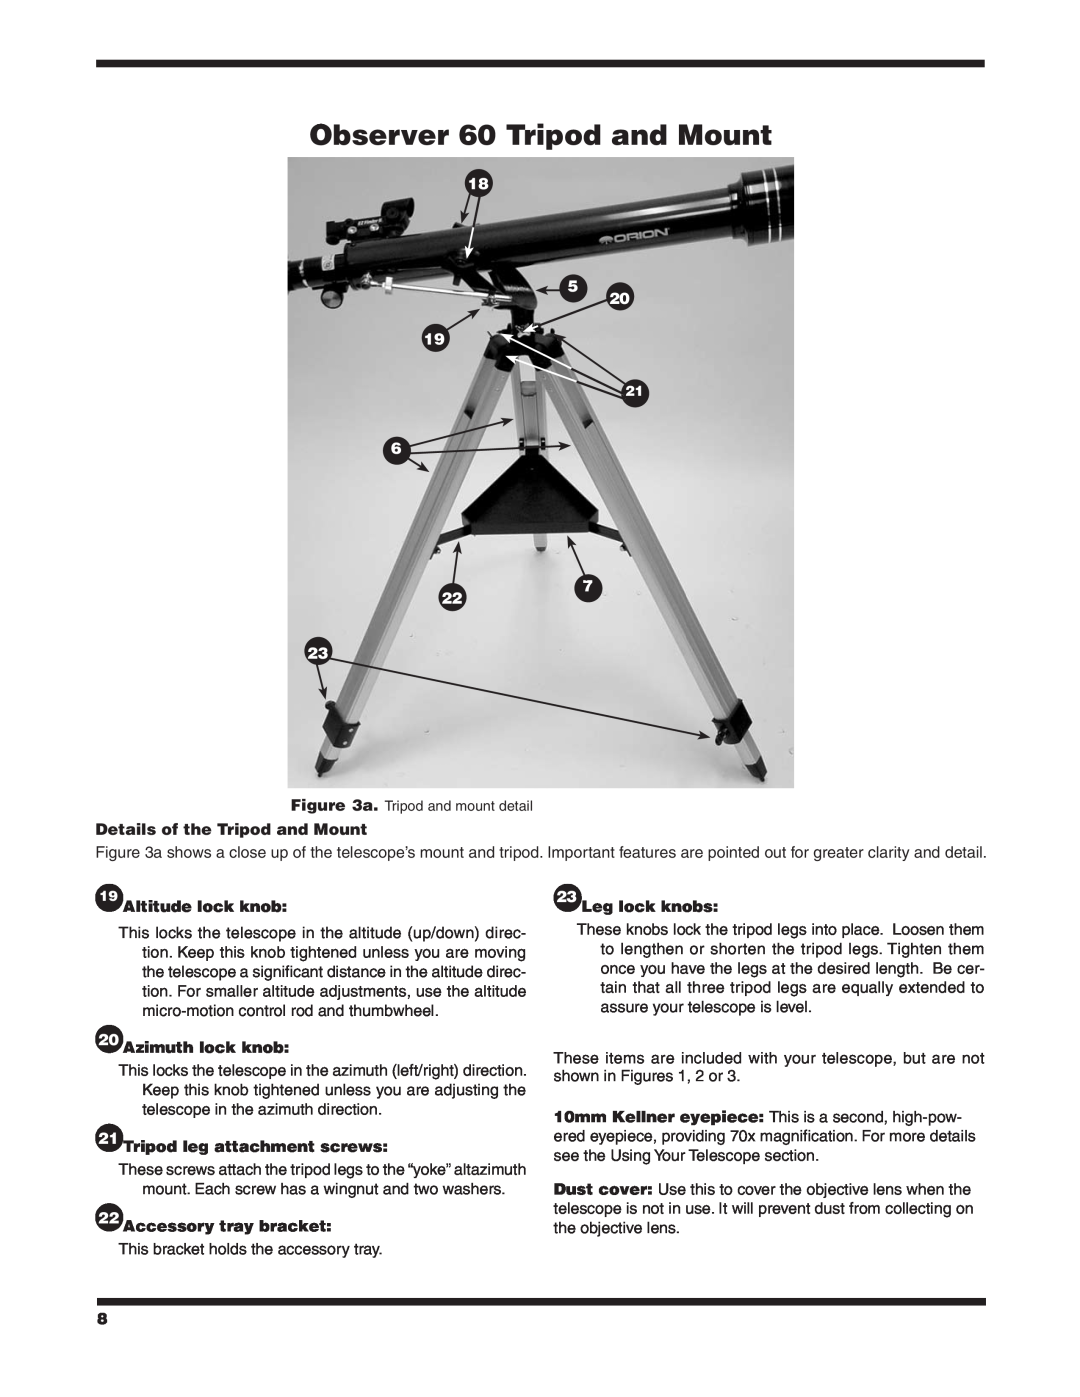 Orion 9854 Observer 60 Tripod and Mount, Details of the Tripod and Mount, Altitude lock knob, Leg lock knobs 